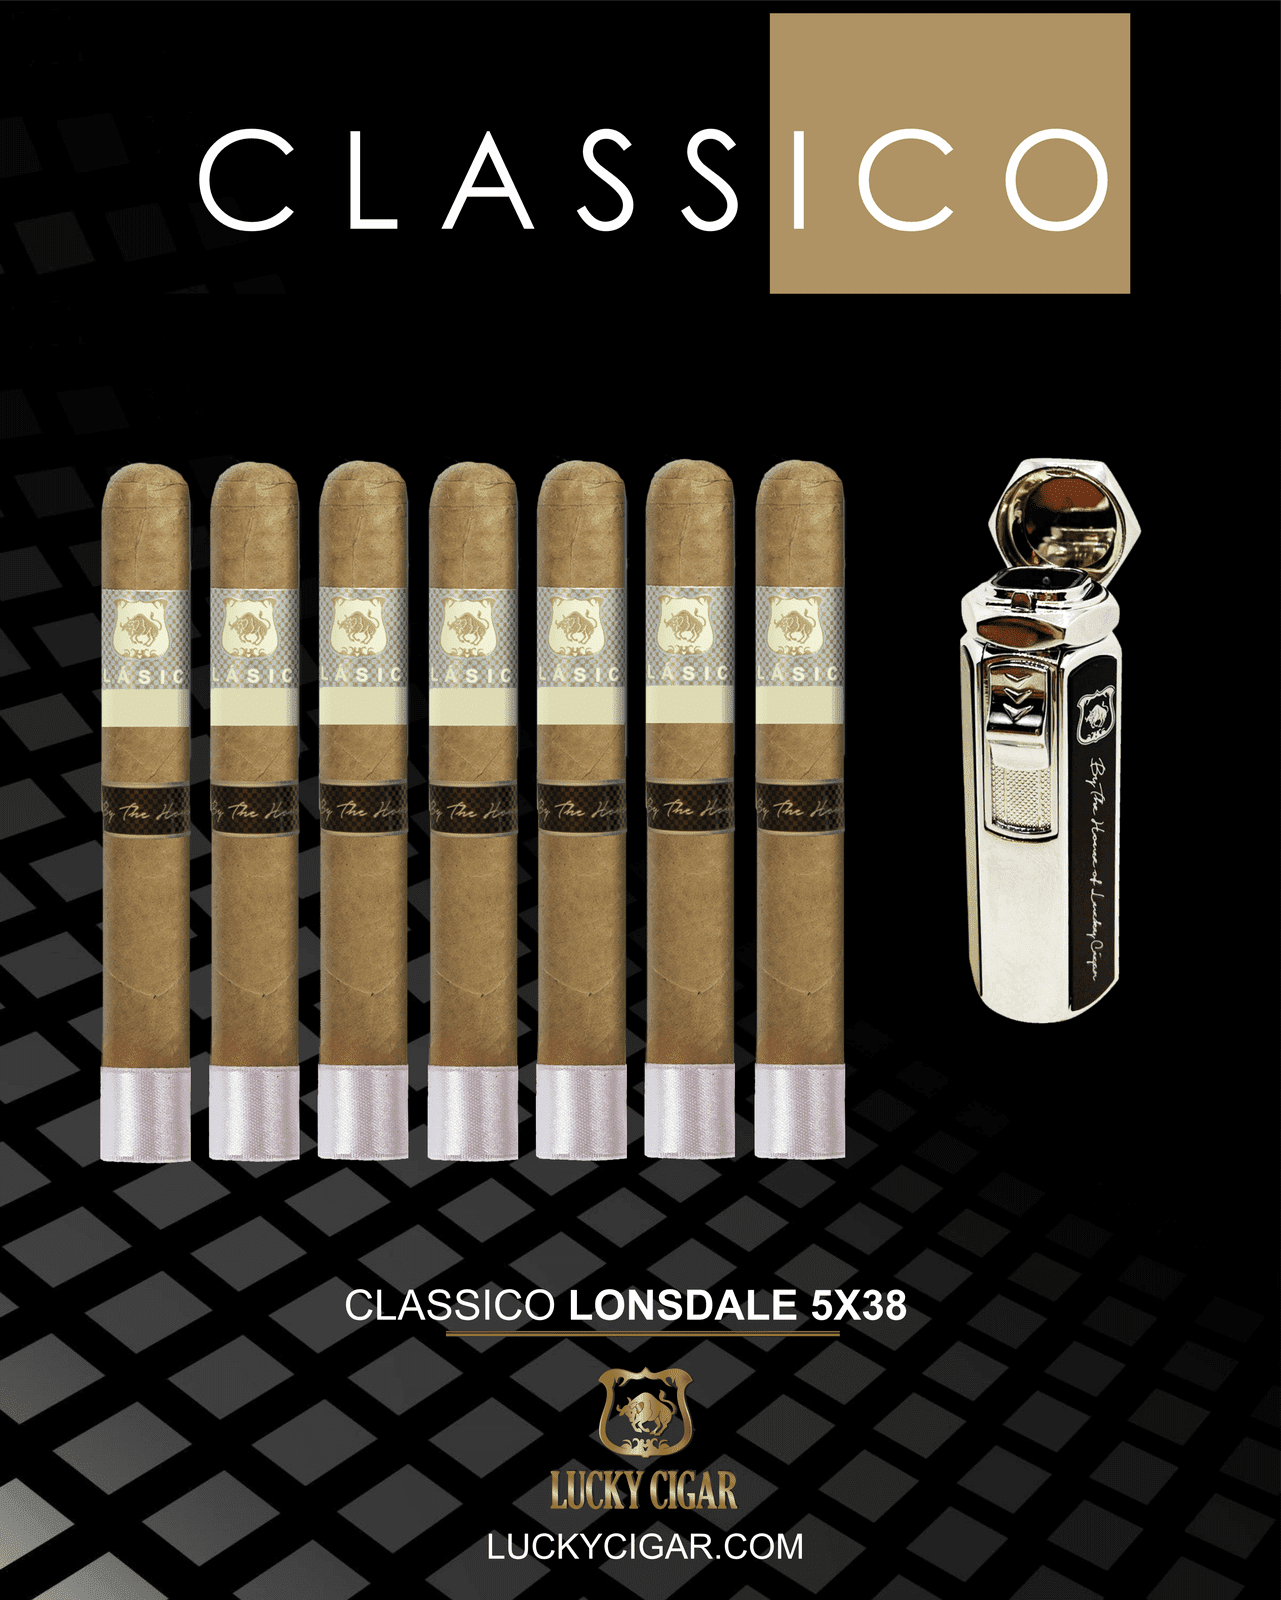 Classic Cigars - Classico by Lucky Cigar: Set of 7 Cigars, 7 Lonsdale with Torch